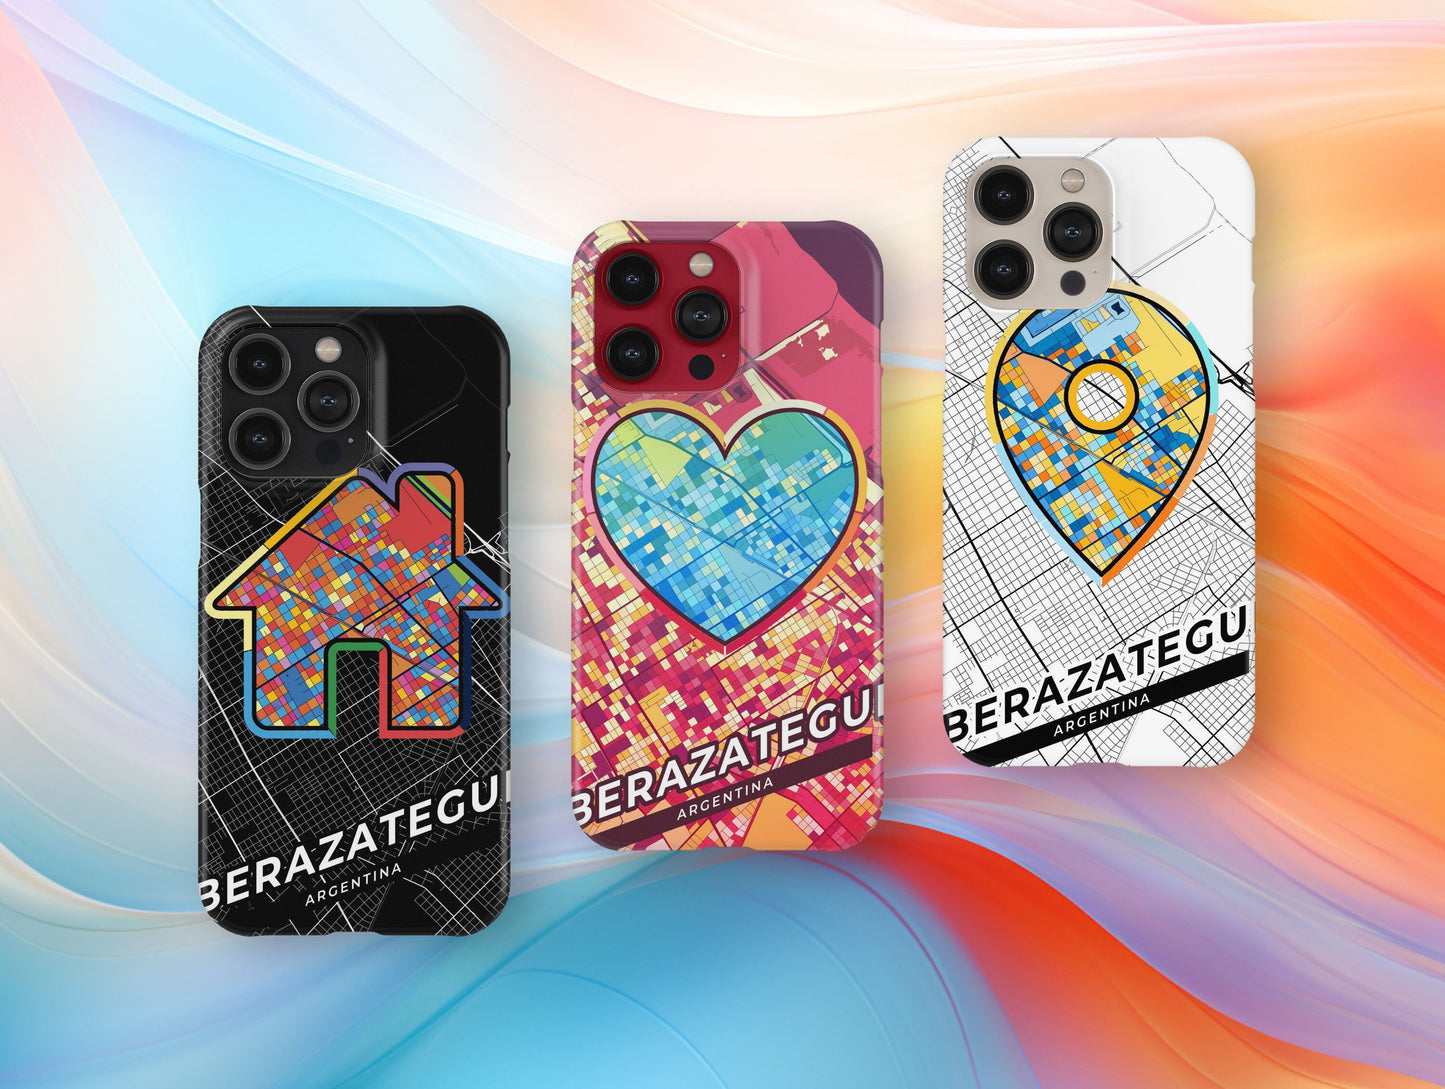 Berazategui Argentina slim phone case with colorful icon. Birthday, wedding or housewarming gift. Couple match cases.